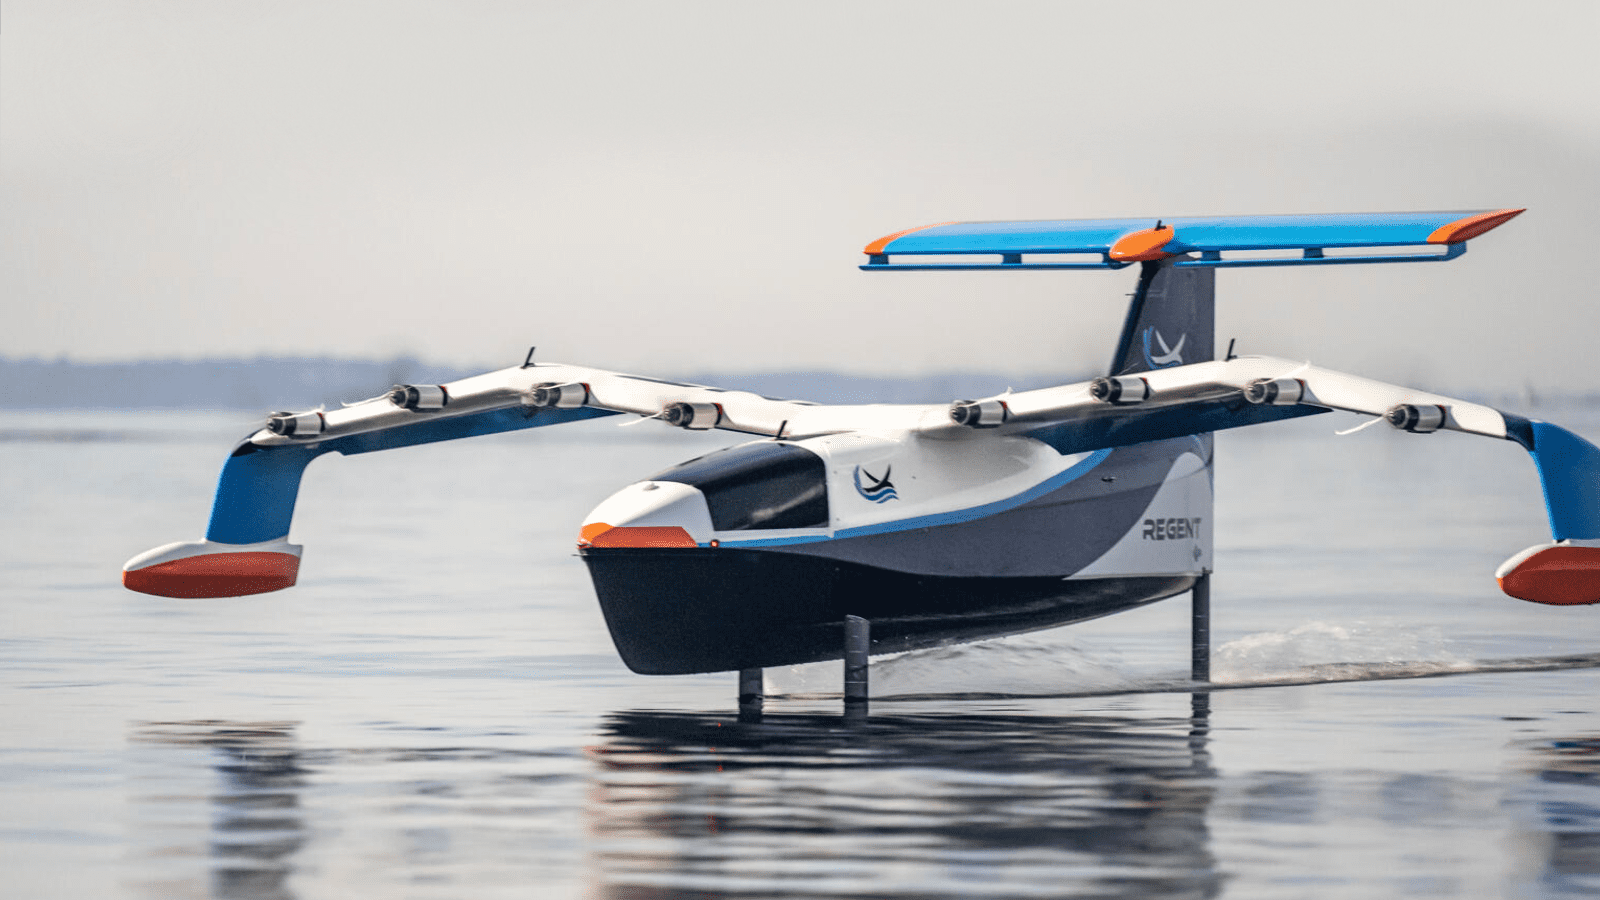 German tech giants Siemens are getting into the airplane business, thanks to a partnership with sea plane builder, Regent.